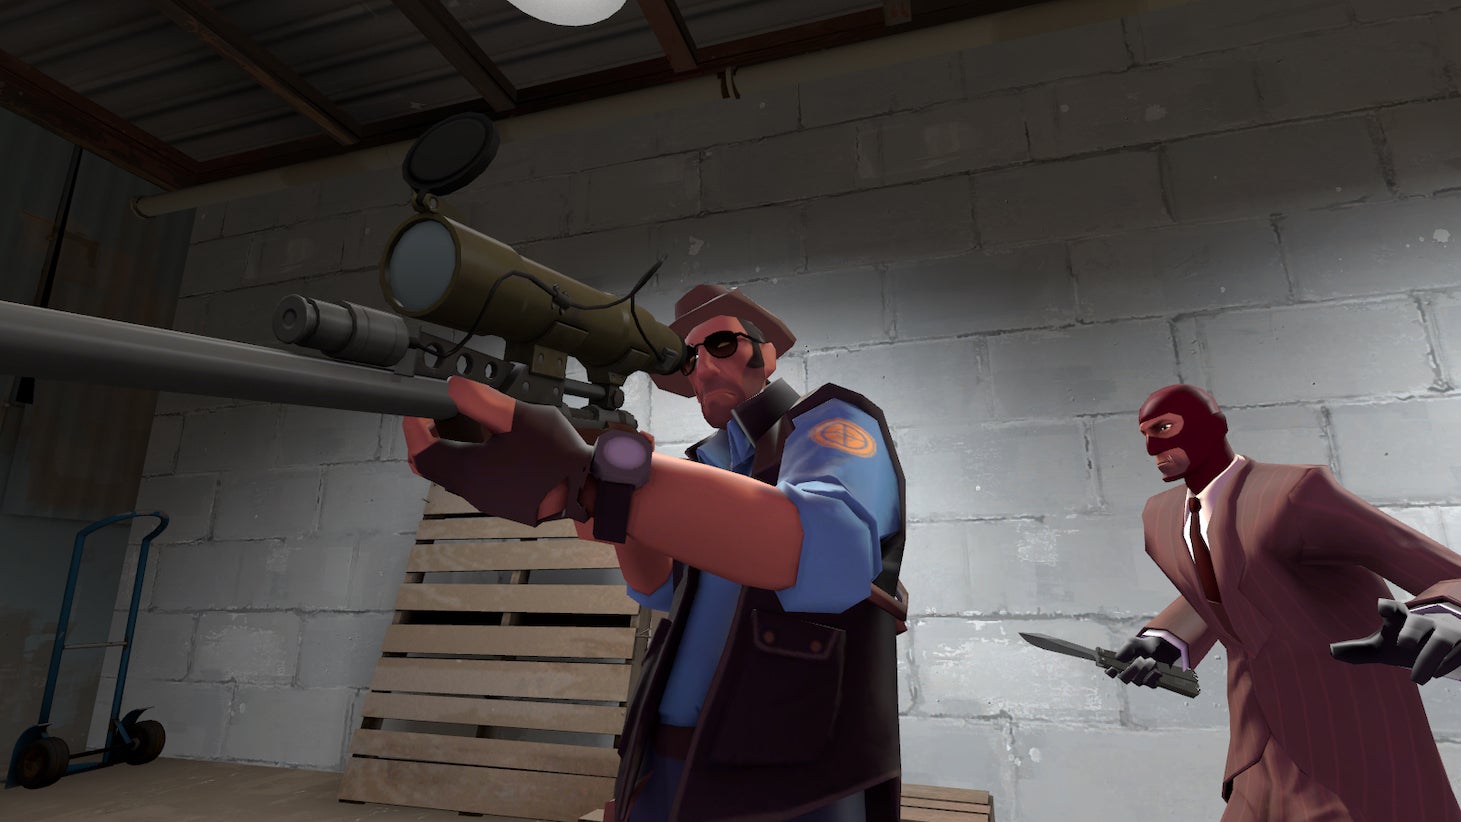 A sniper is getting ambushed in Team Fortress 2